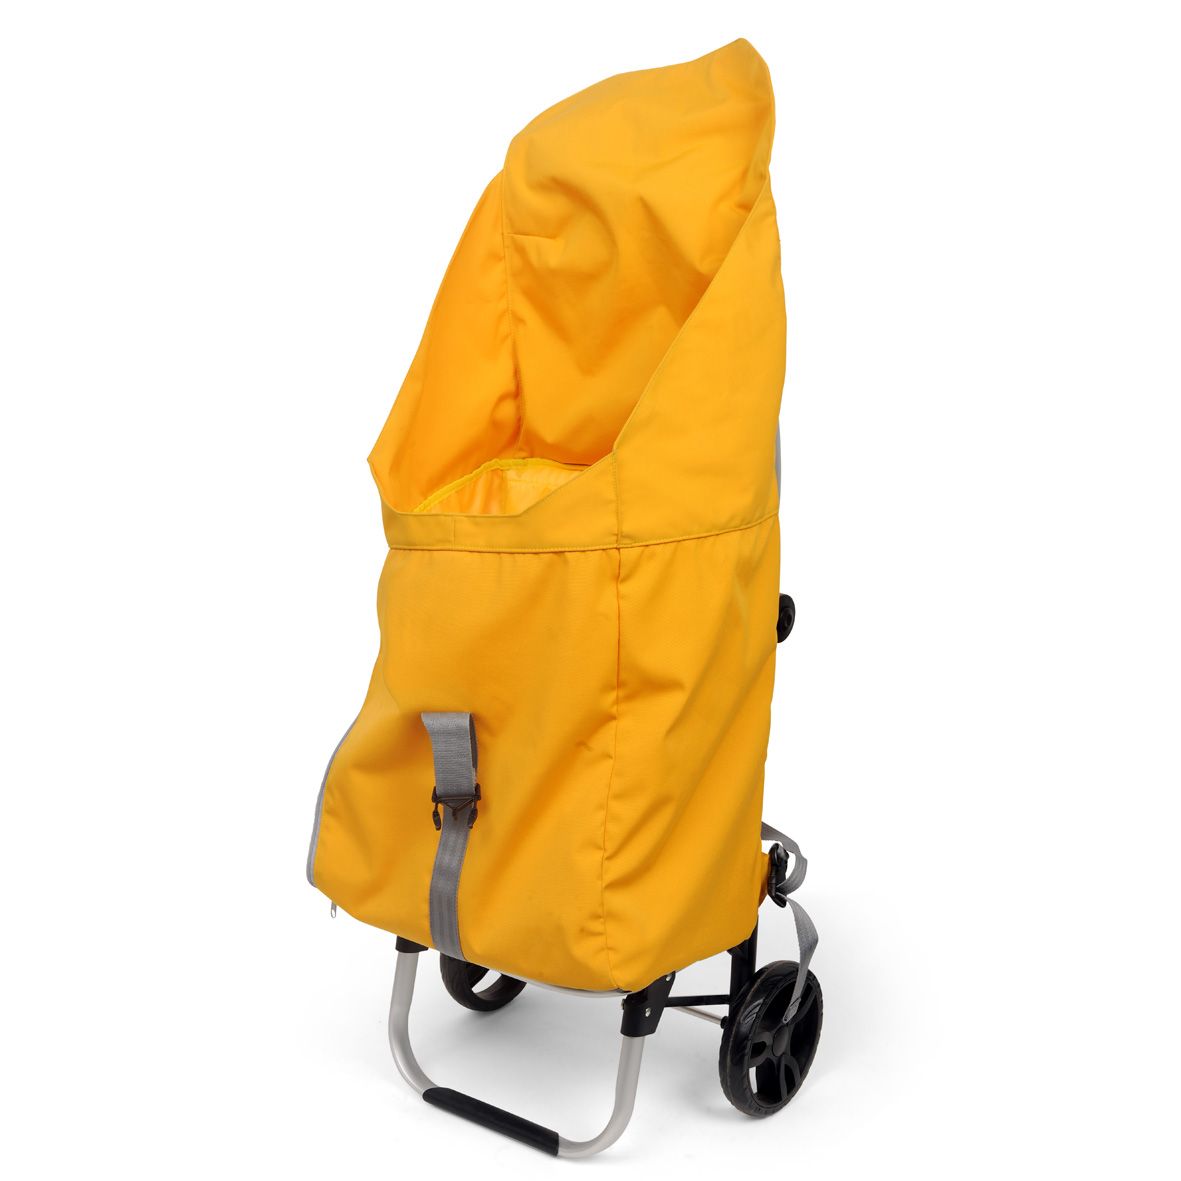 ORCA OR-542Y DSLR Accessories Cart Yellow